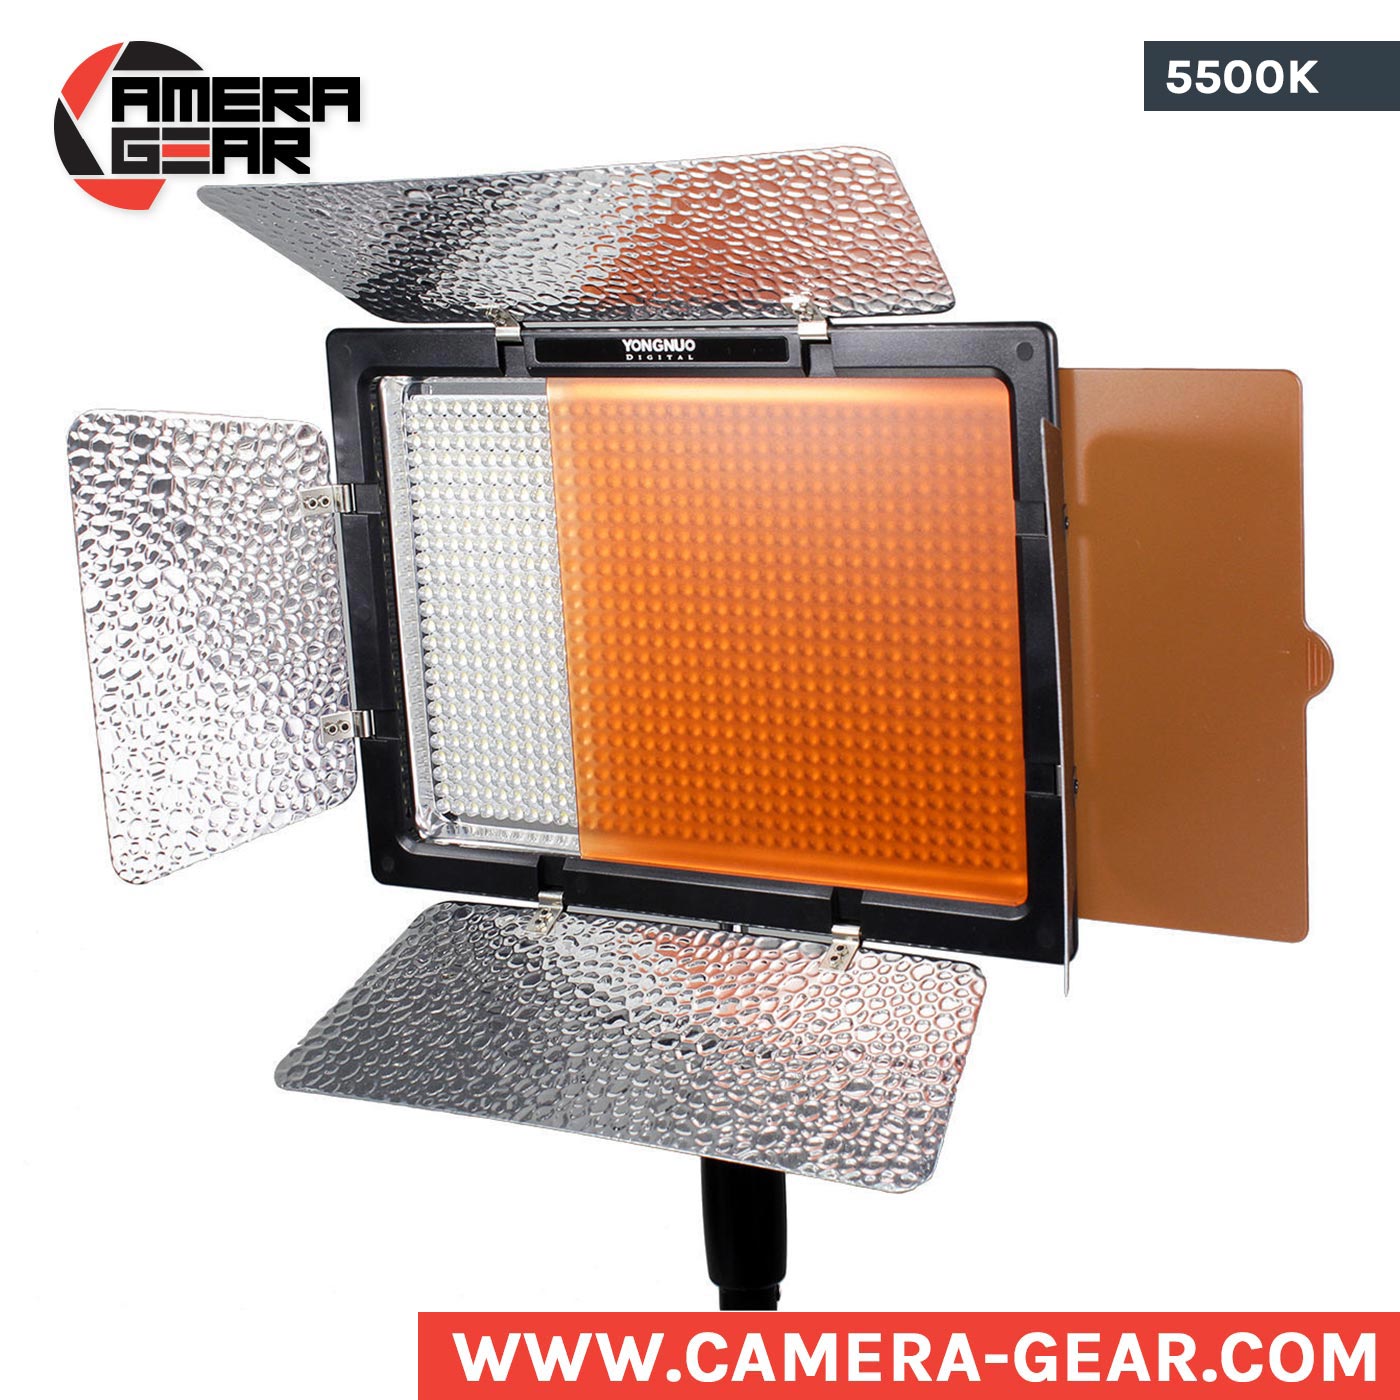 Comes with Microfiber Cleaning Cloth 5500k Adjustable Color Temperatur e for the SLR Cameras Camcorders YONGNUO YN900 YN-900 Pro LED Video Light/ LED Studio Lamp with 3200k like Canon Nikon Pentax Olympas Samsung Panasonic JVC etc